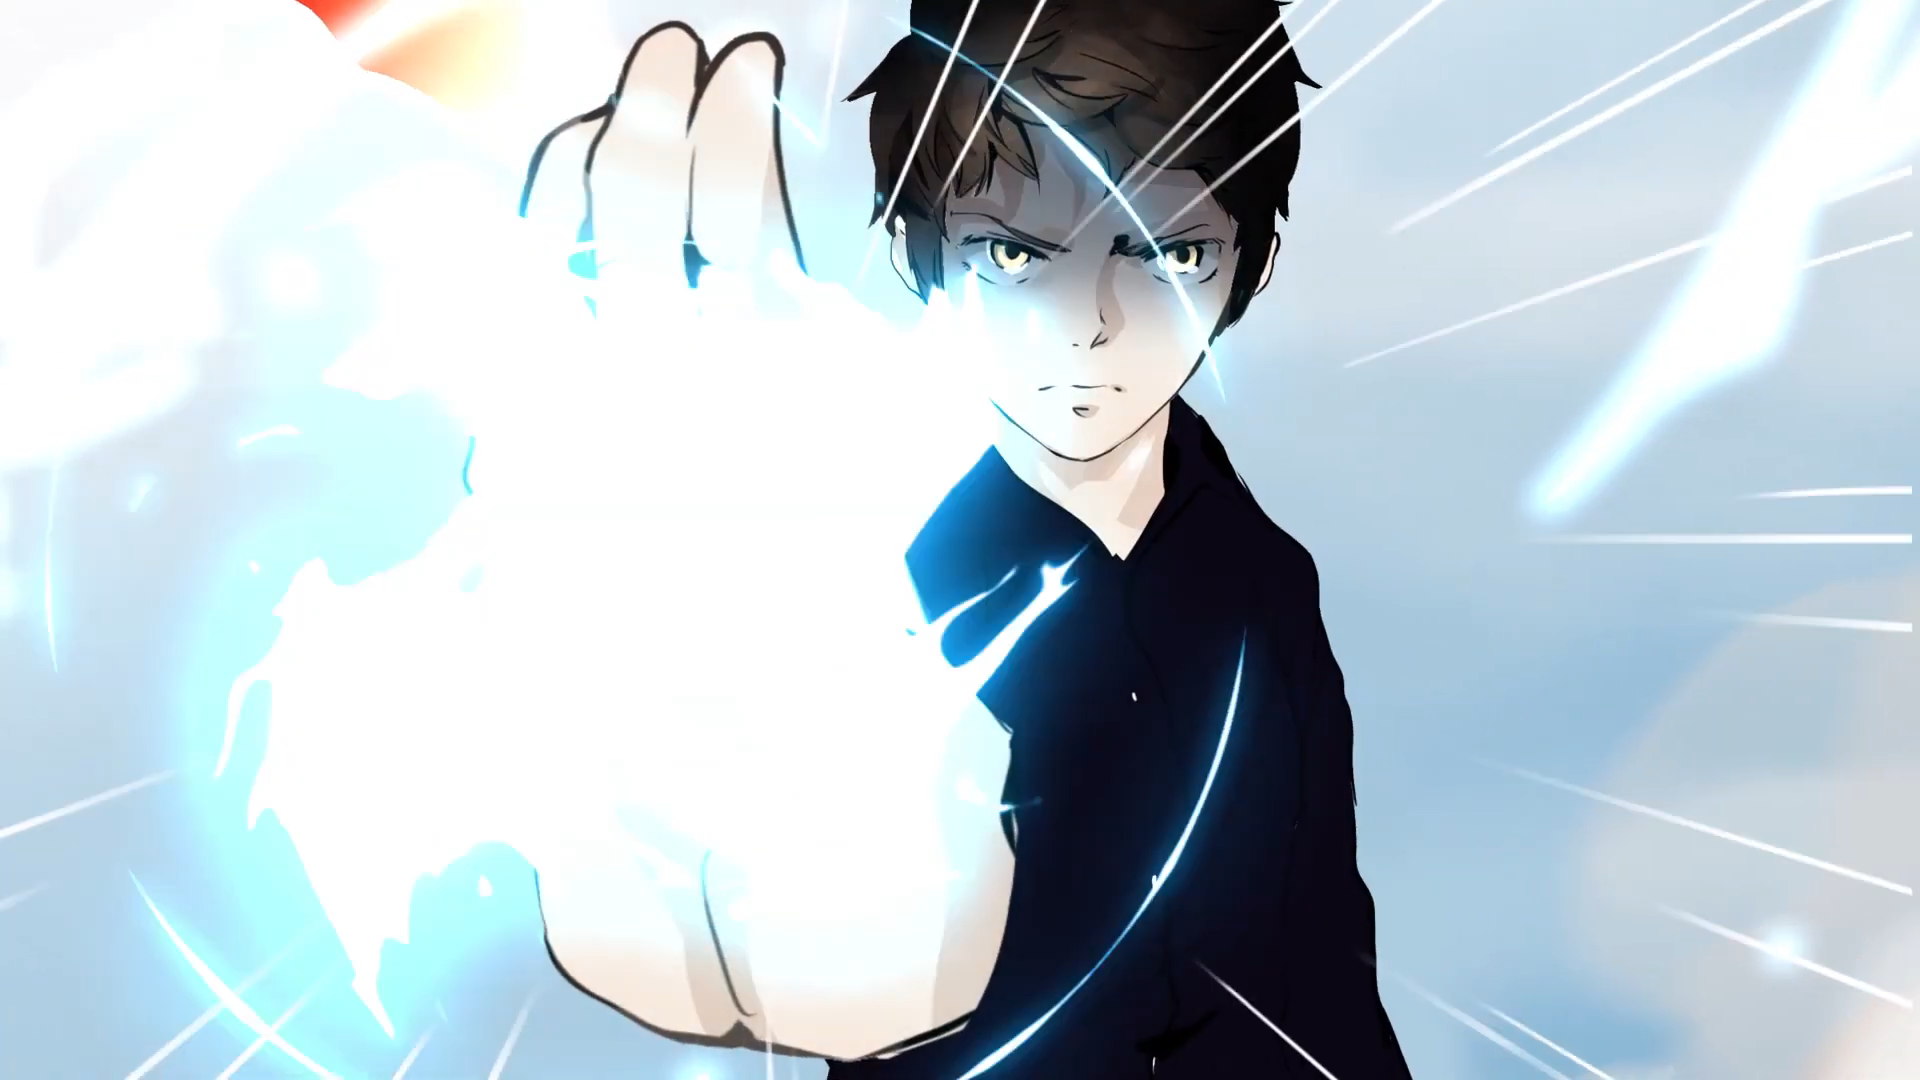 Tower of God Anime Releases Trailer  Anime release, Anime, Upcoming anime